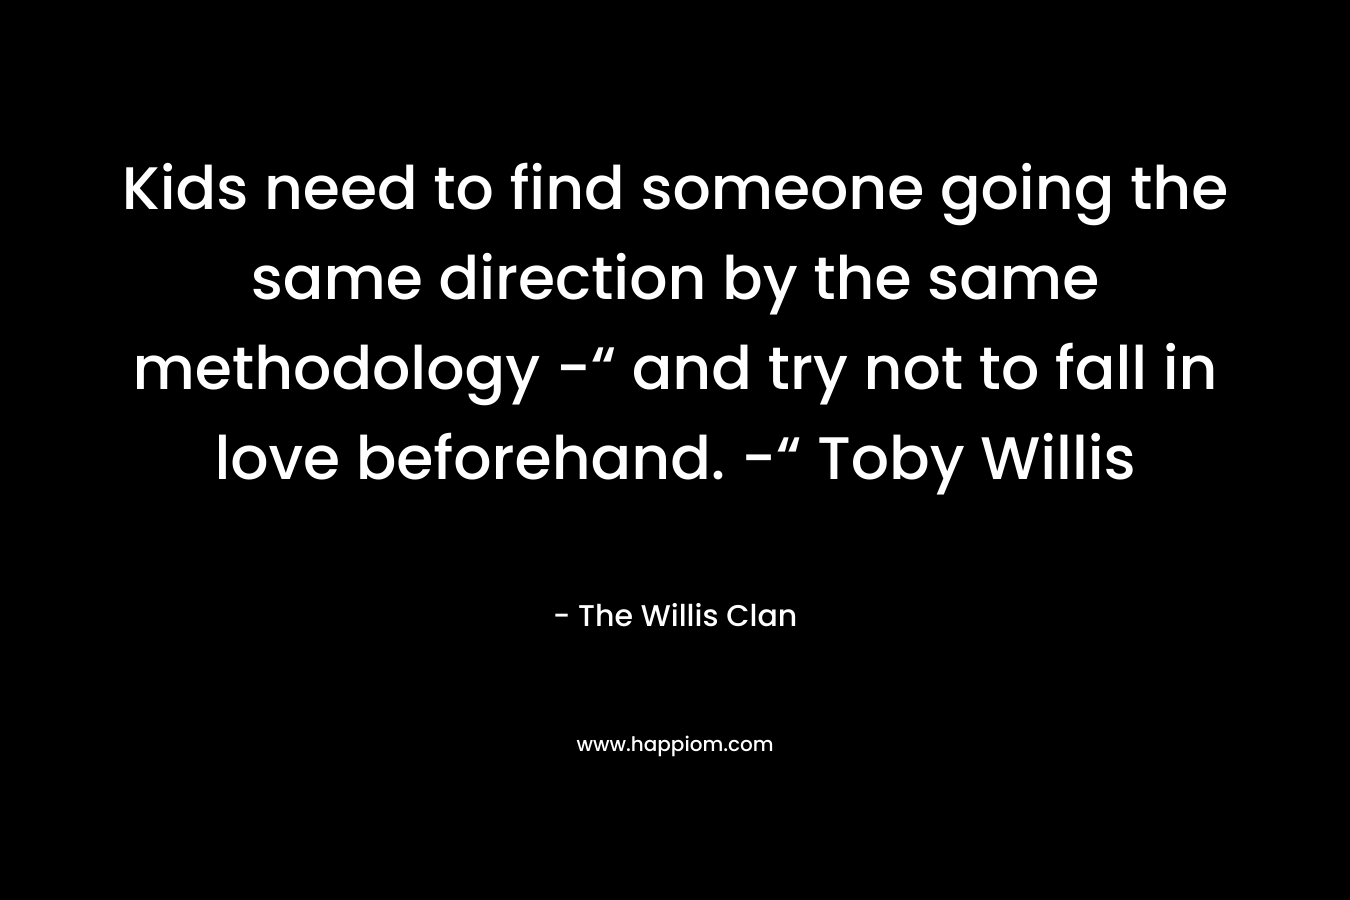 Kids need to find someone going the same direction by the same methodology -“ and try not to fall in love beforehand. -“ Toby Willis